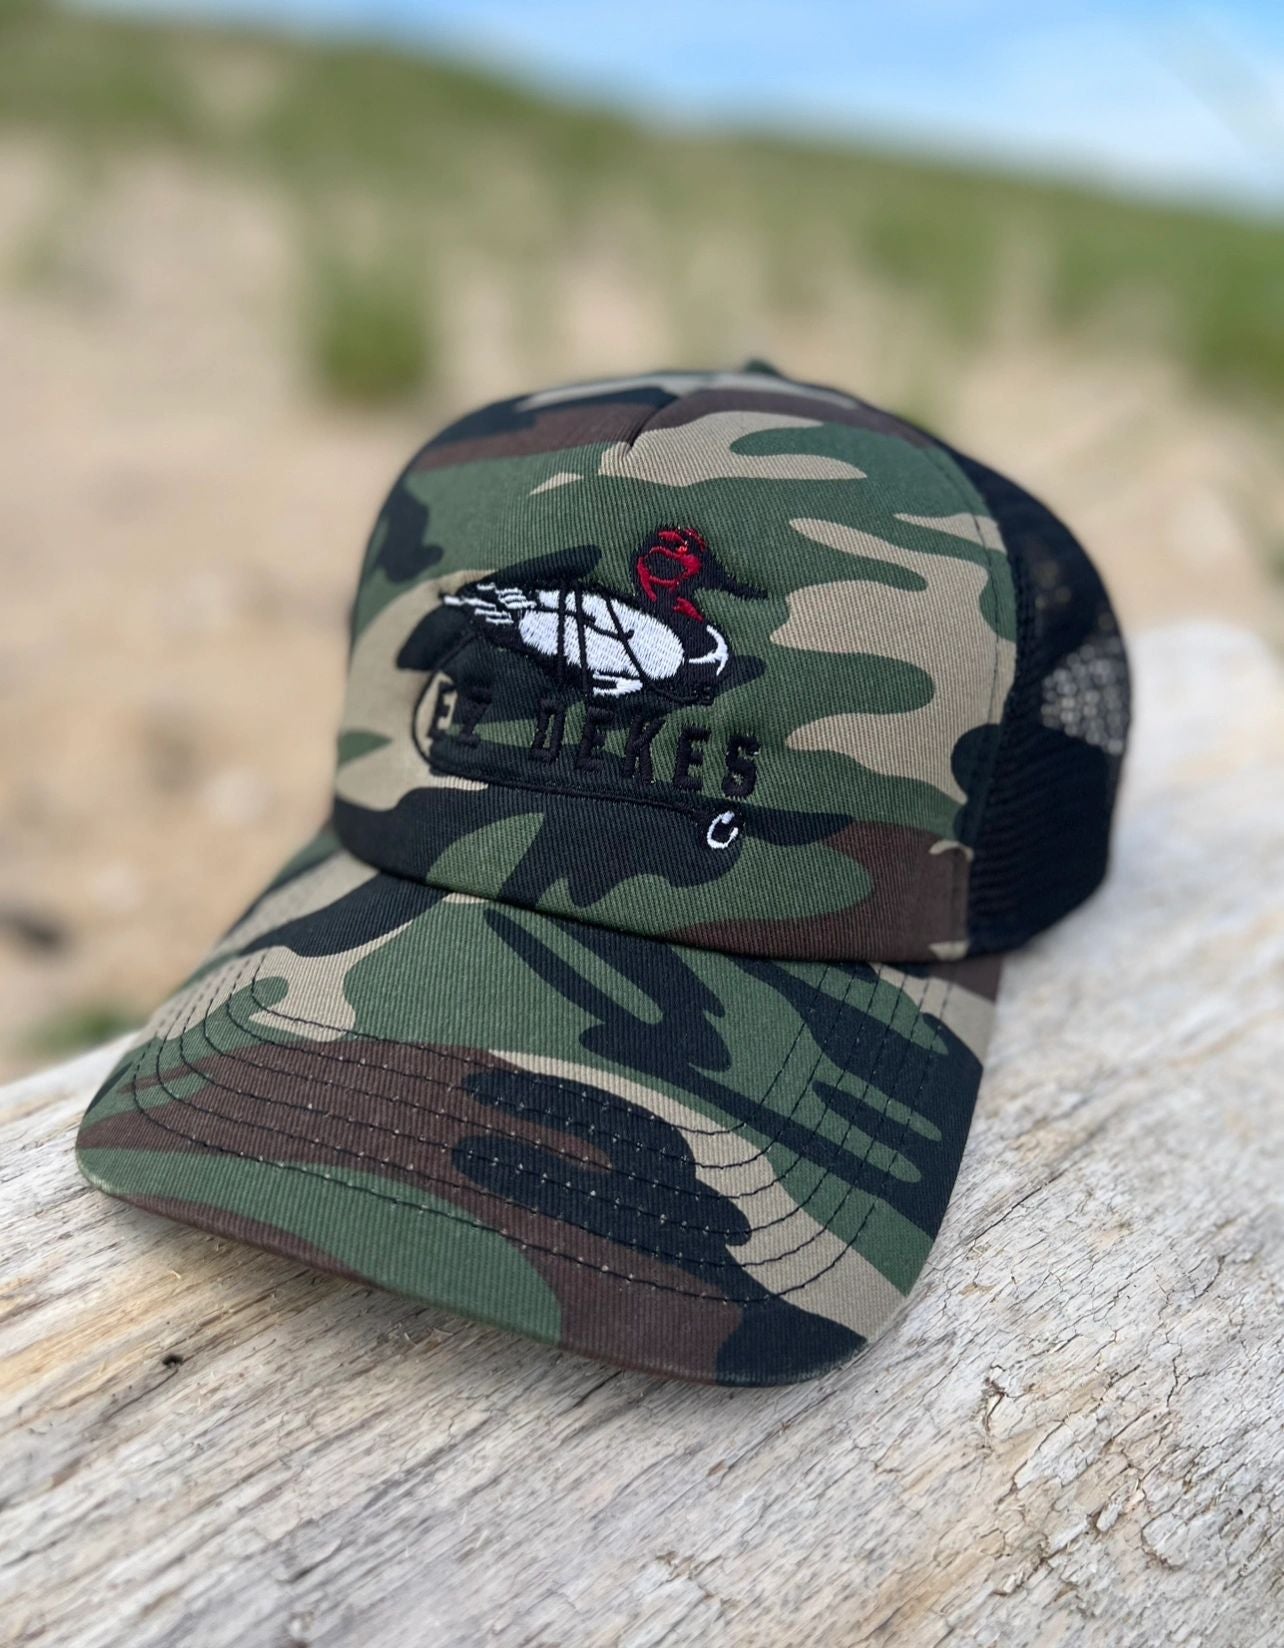 Imperial North Country Trucker Hat - Camo / Black